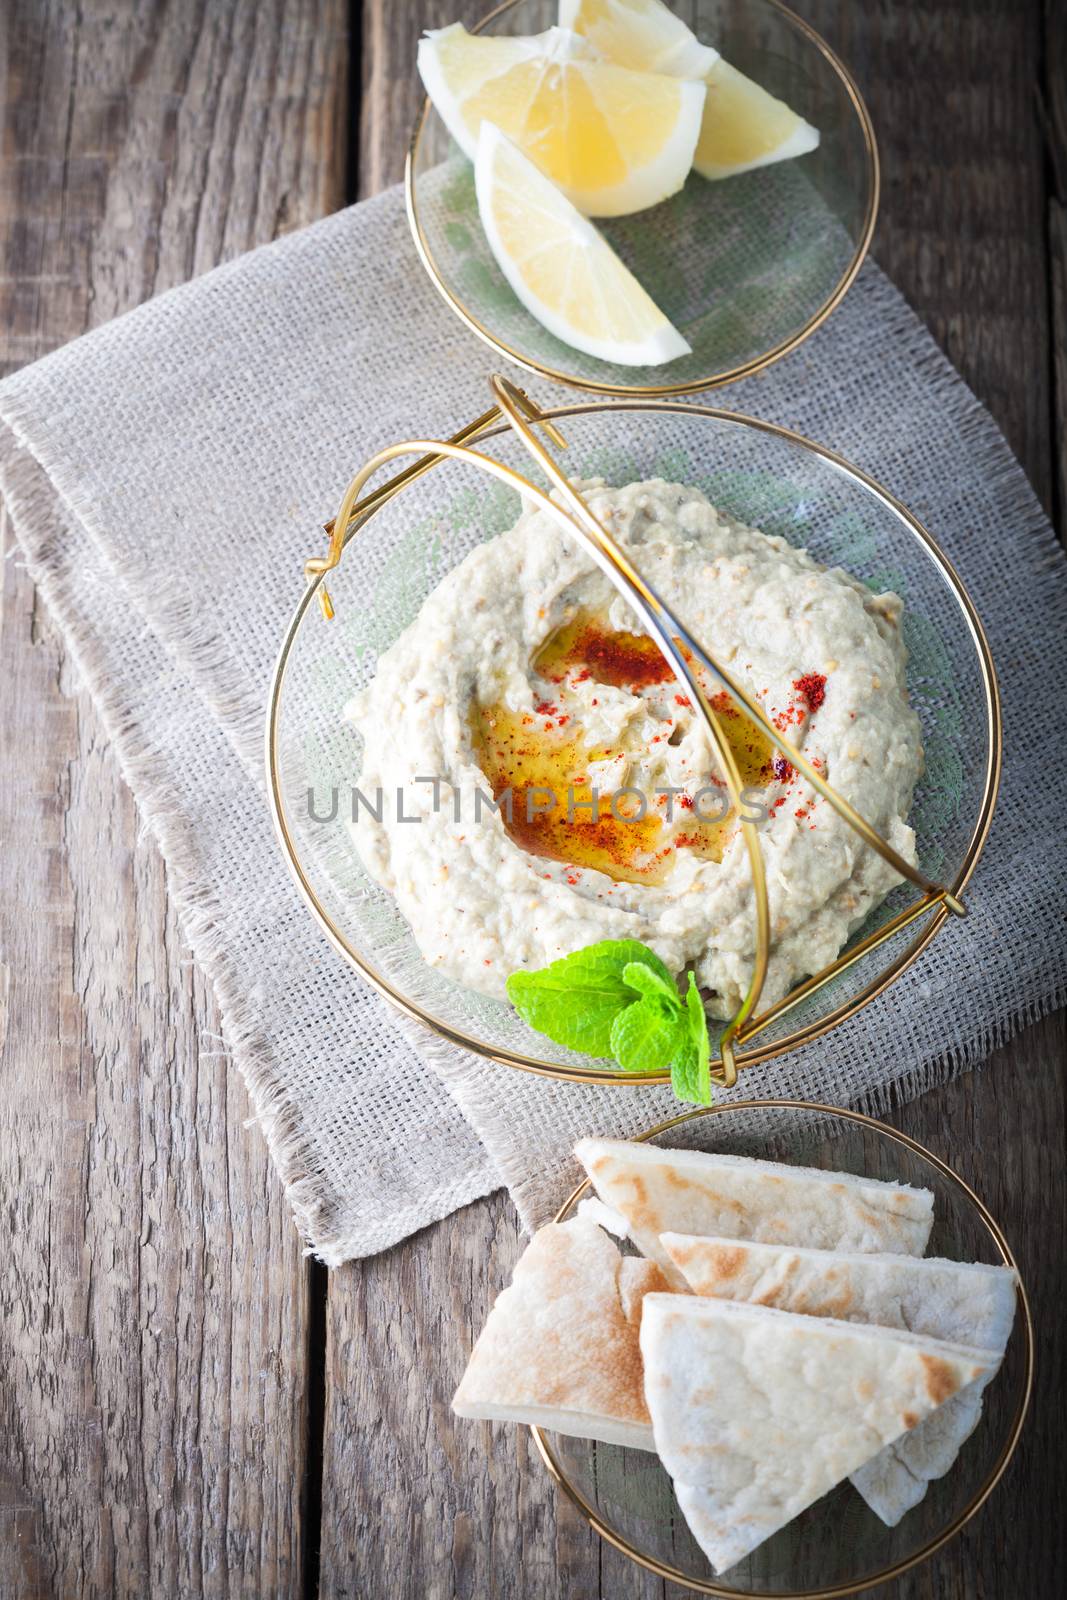 Baba ghanoush, eggplant dip mediterranean food on a wooden surface